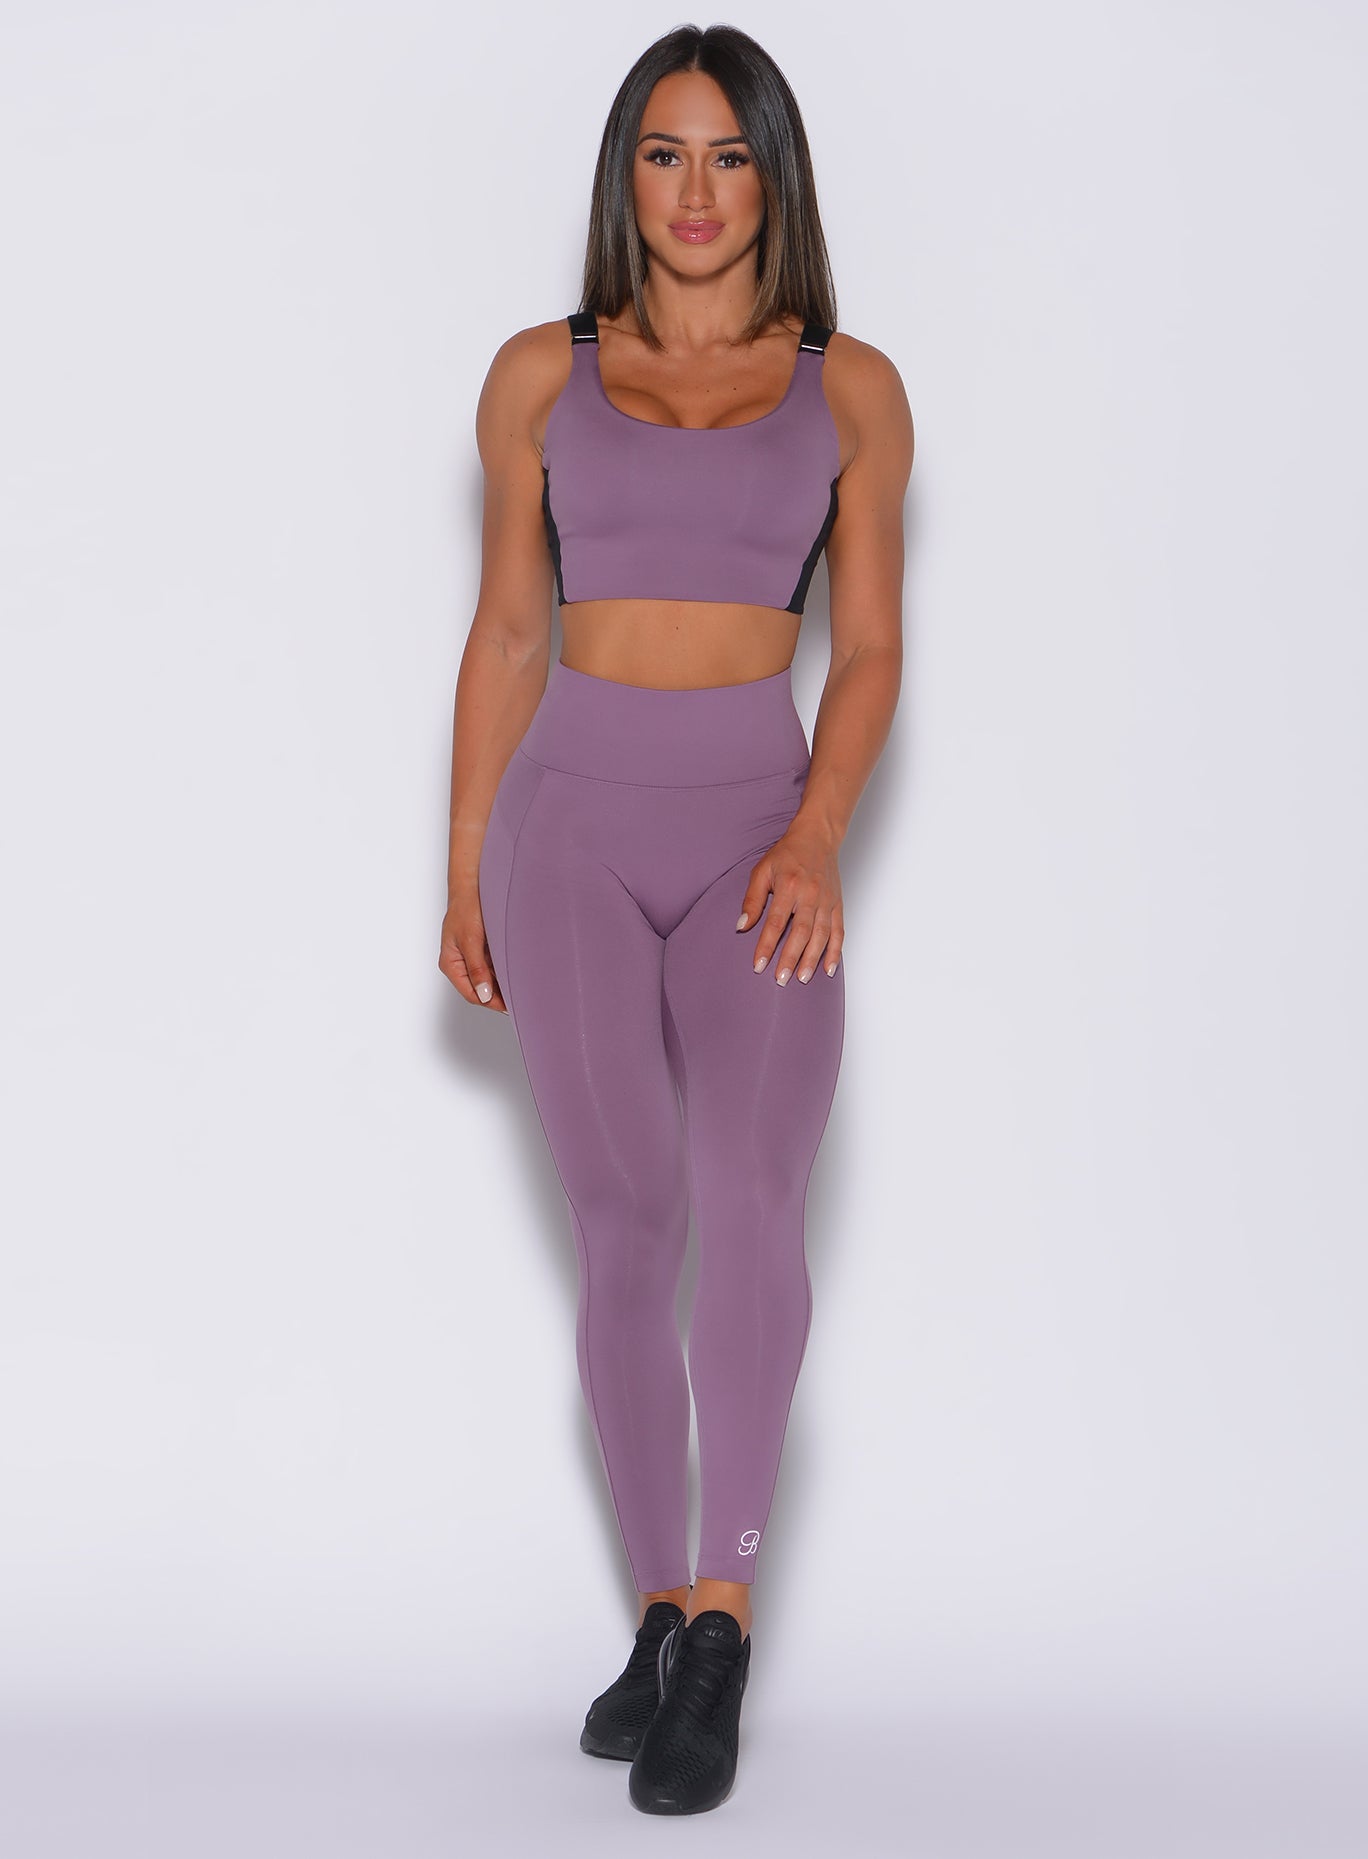 Front profile view of a model in our snatched waist leggings in violet frost color and a matching sports bra